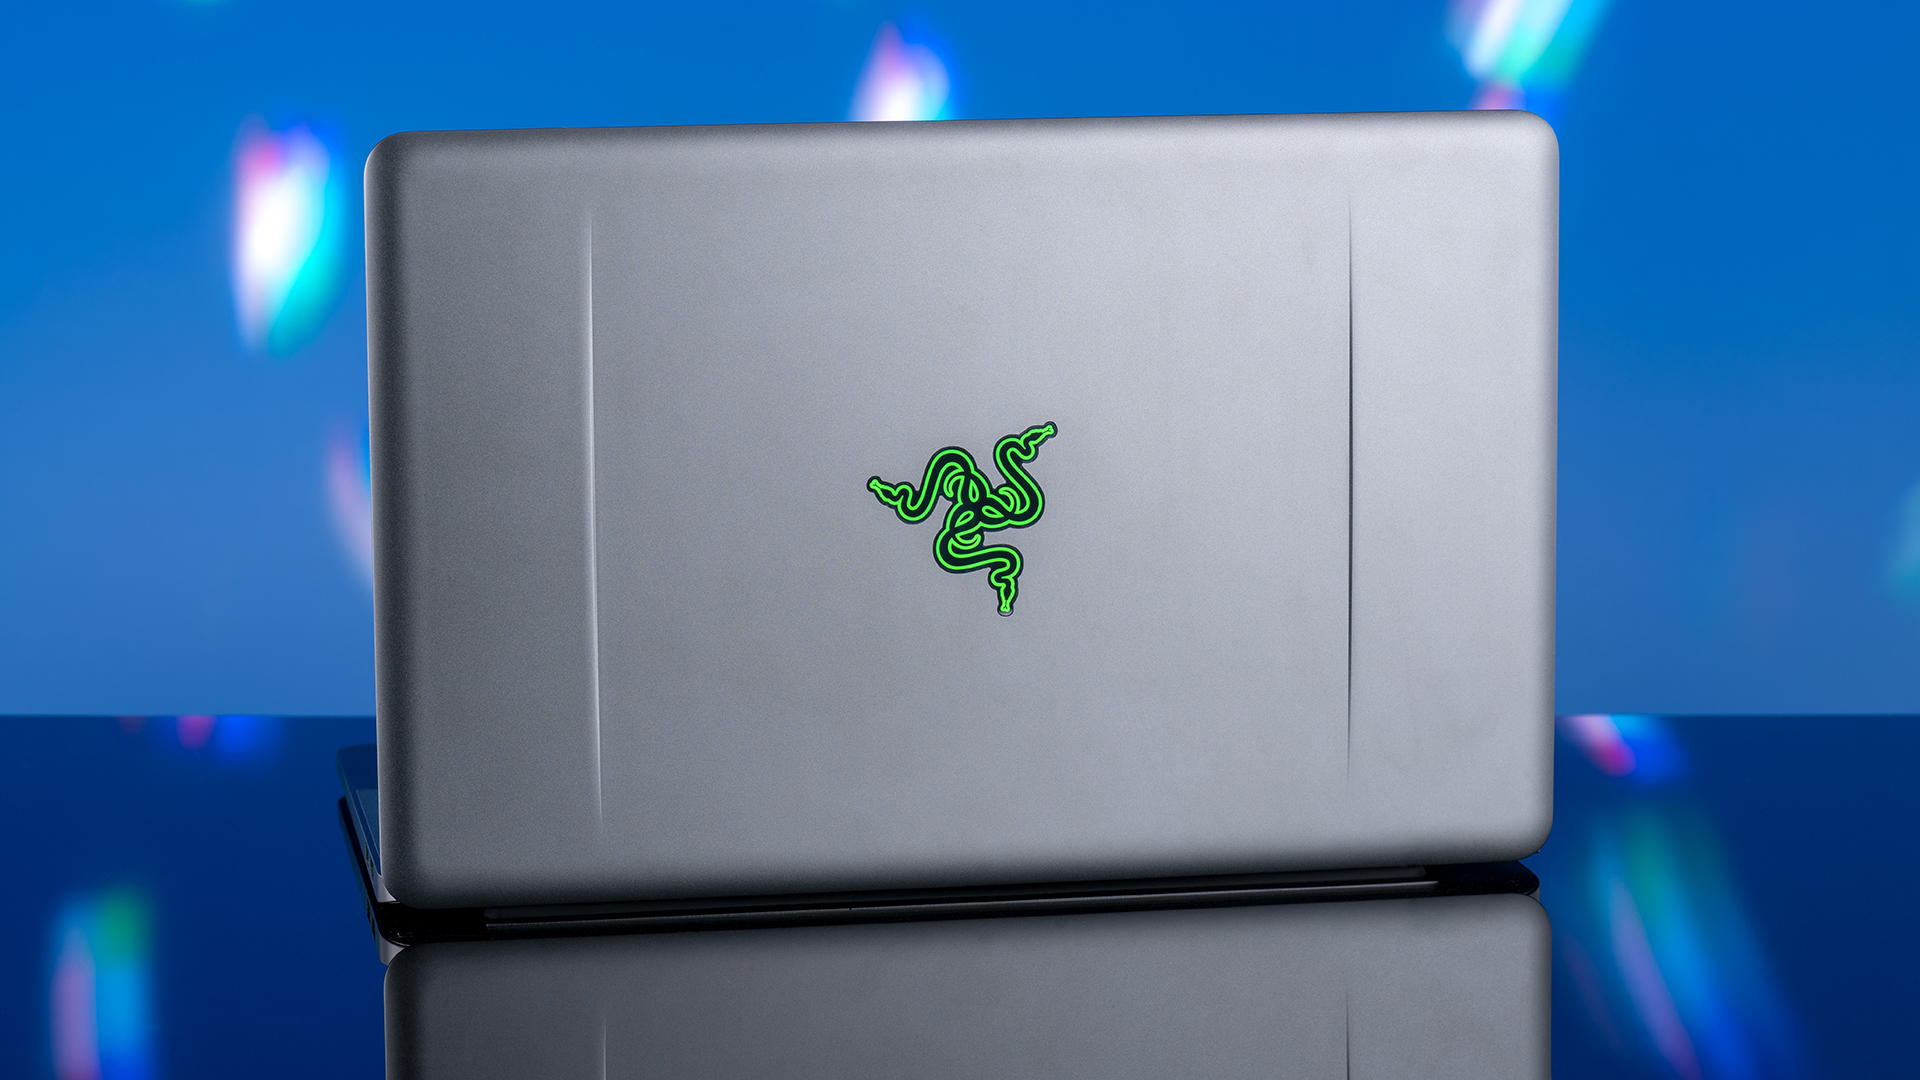 You probably won’t be editing video, or doing any serious 3D rendering on the Stealth, but photographers and artists could probably put the Razer Blade Stealth to good use.